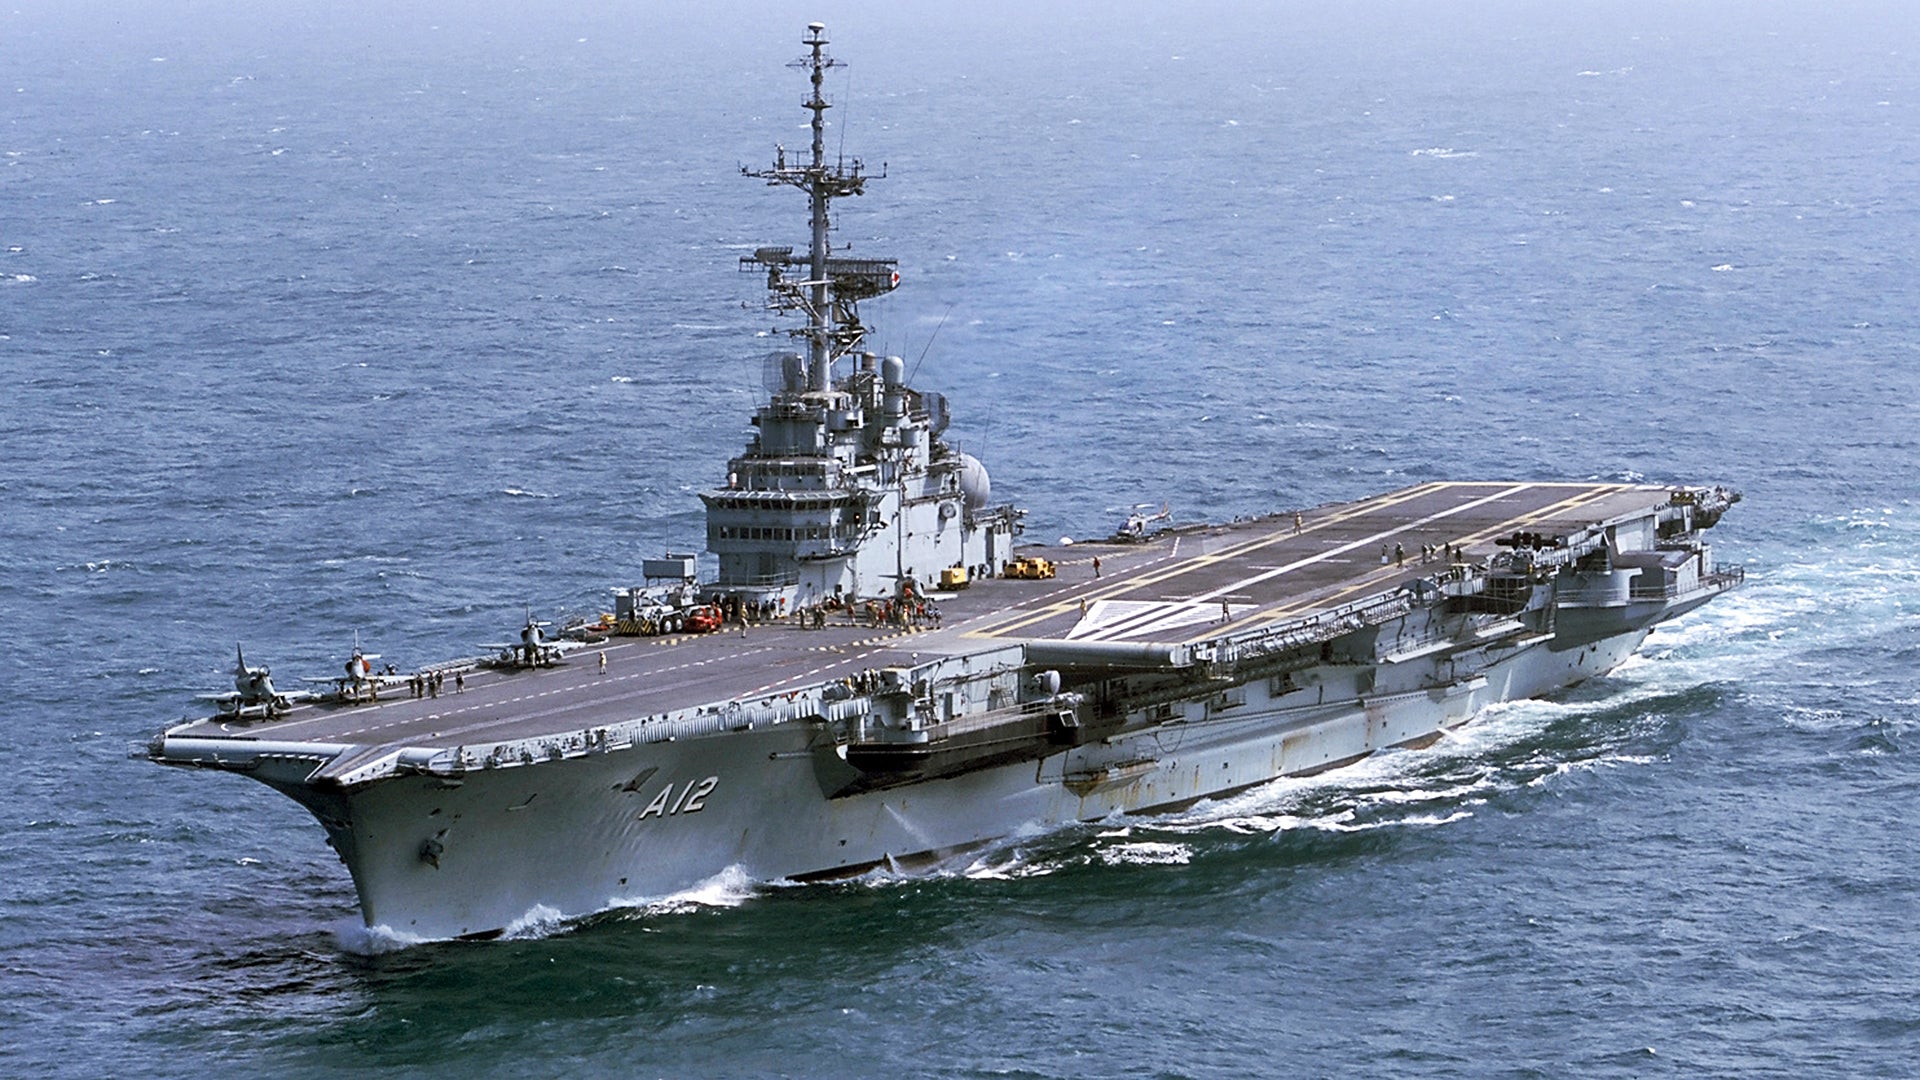 Brazil Pulls The Plug On Its Only Aircraft Carrier